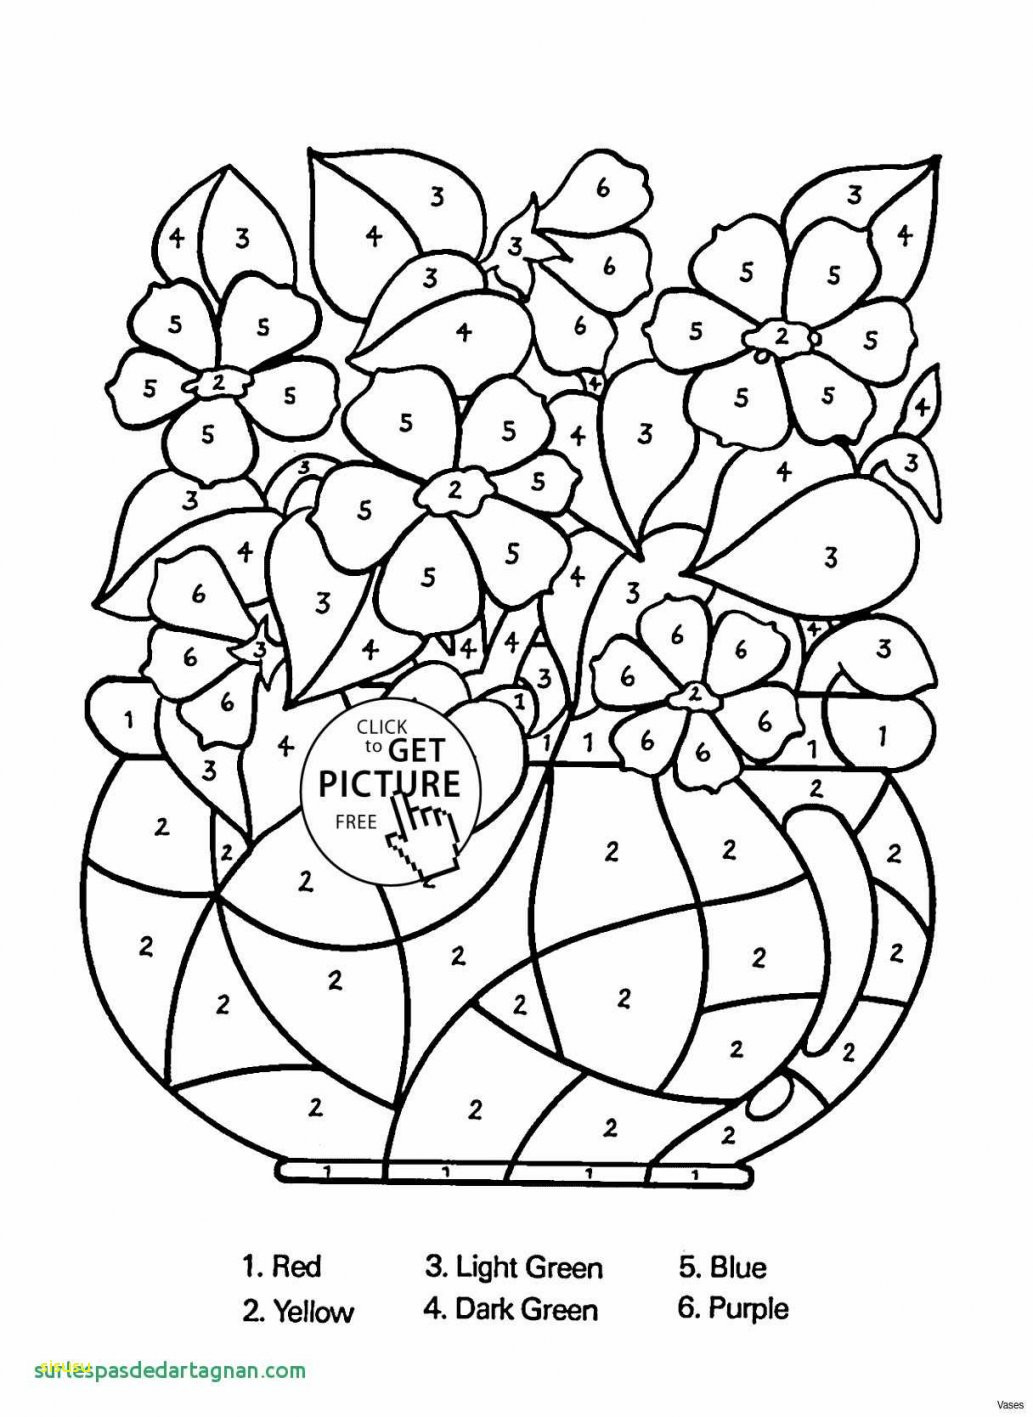 26 Elegant wholesale Vases Nyc 2024 free download wholesale vases nyc of awesome mandeville florist wedding reception ideas with regard to coloring page airplane free printable 2019 vases flower vase coloring page pages flowers in a top